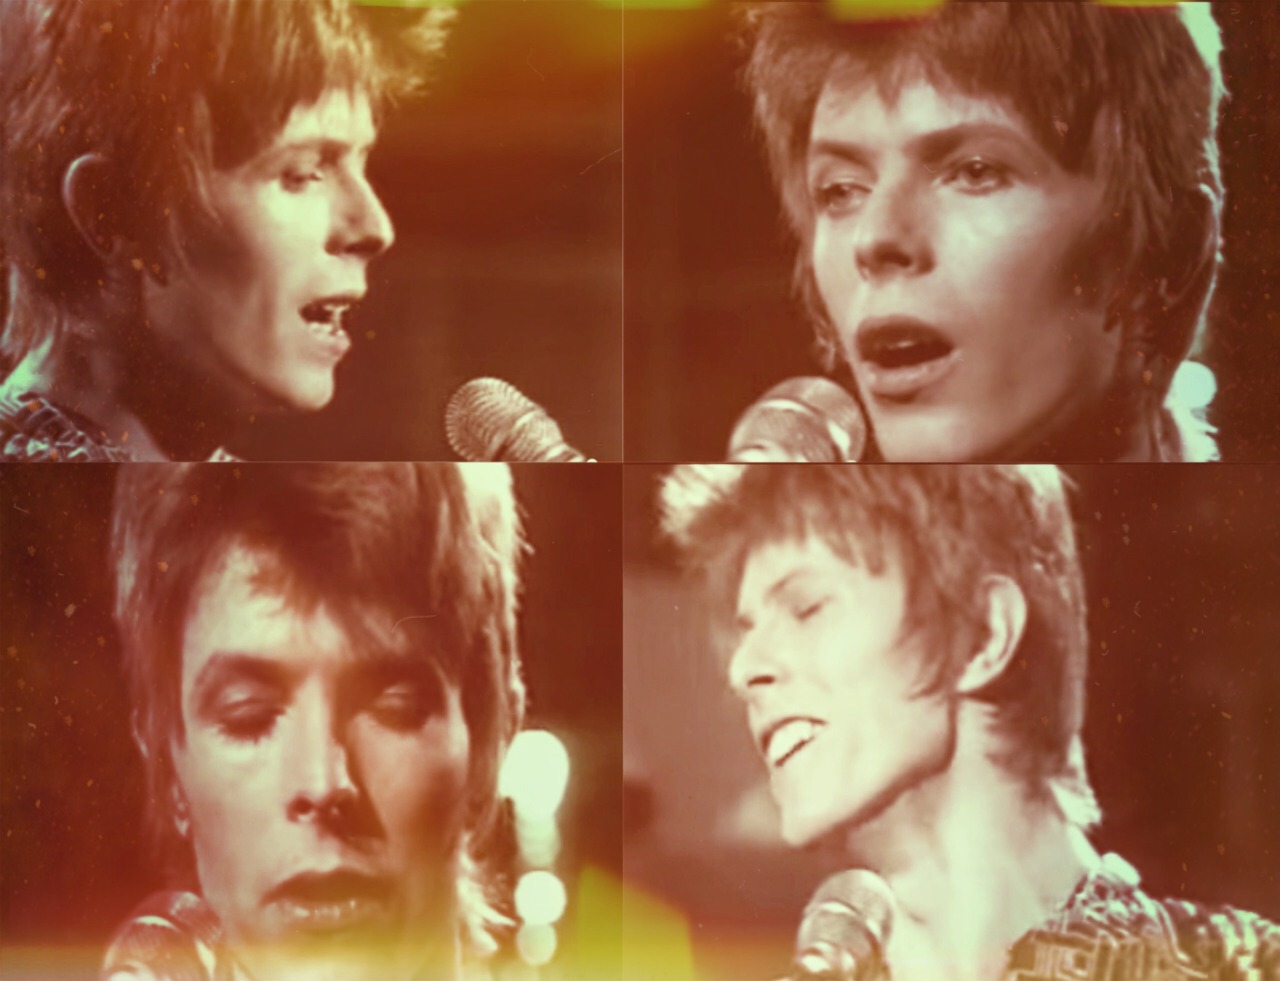 b0wie-baby:  bowieziggy77:  “Bowies screaming, and what you hear on that song [‘Five